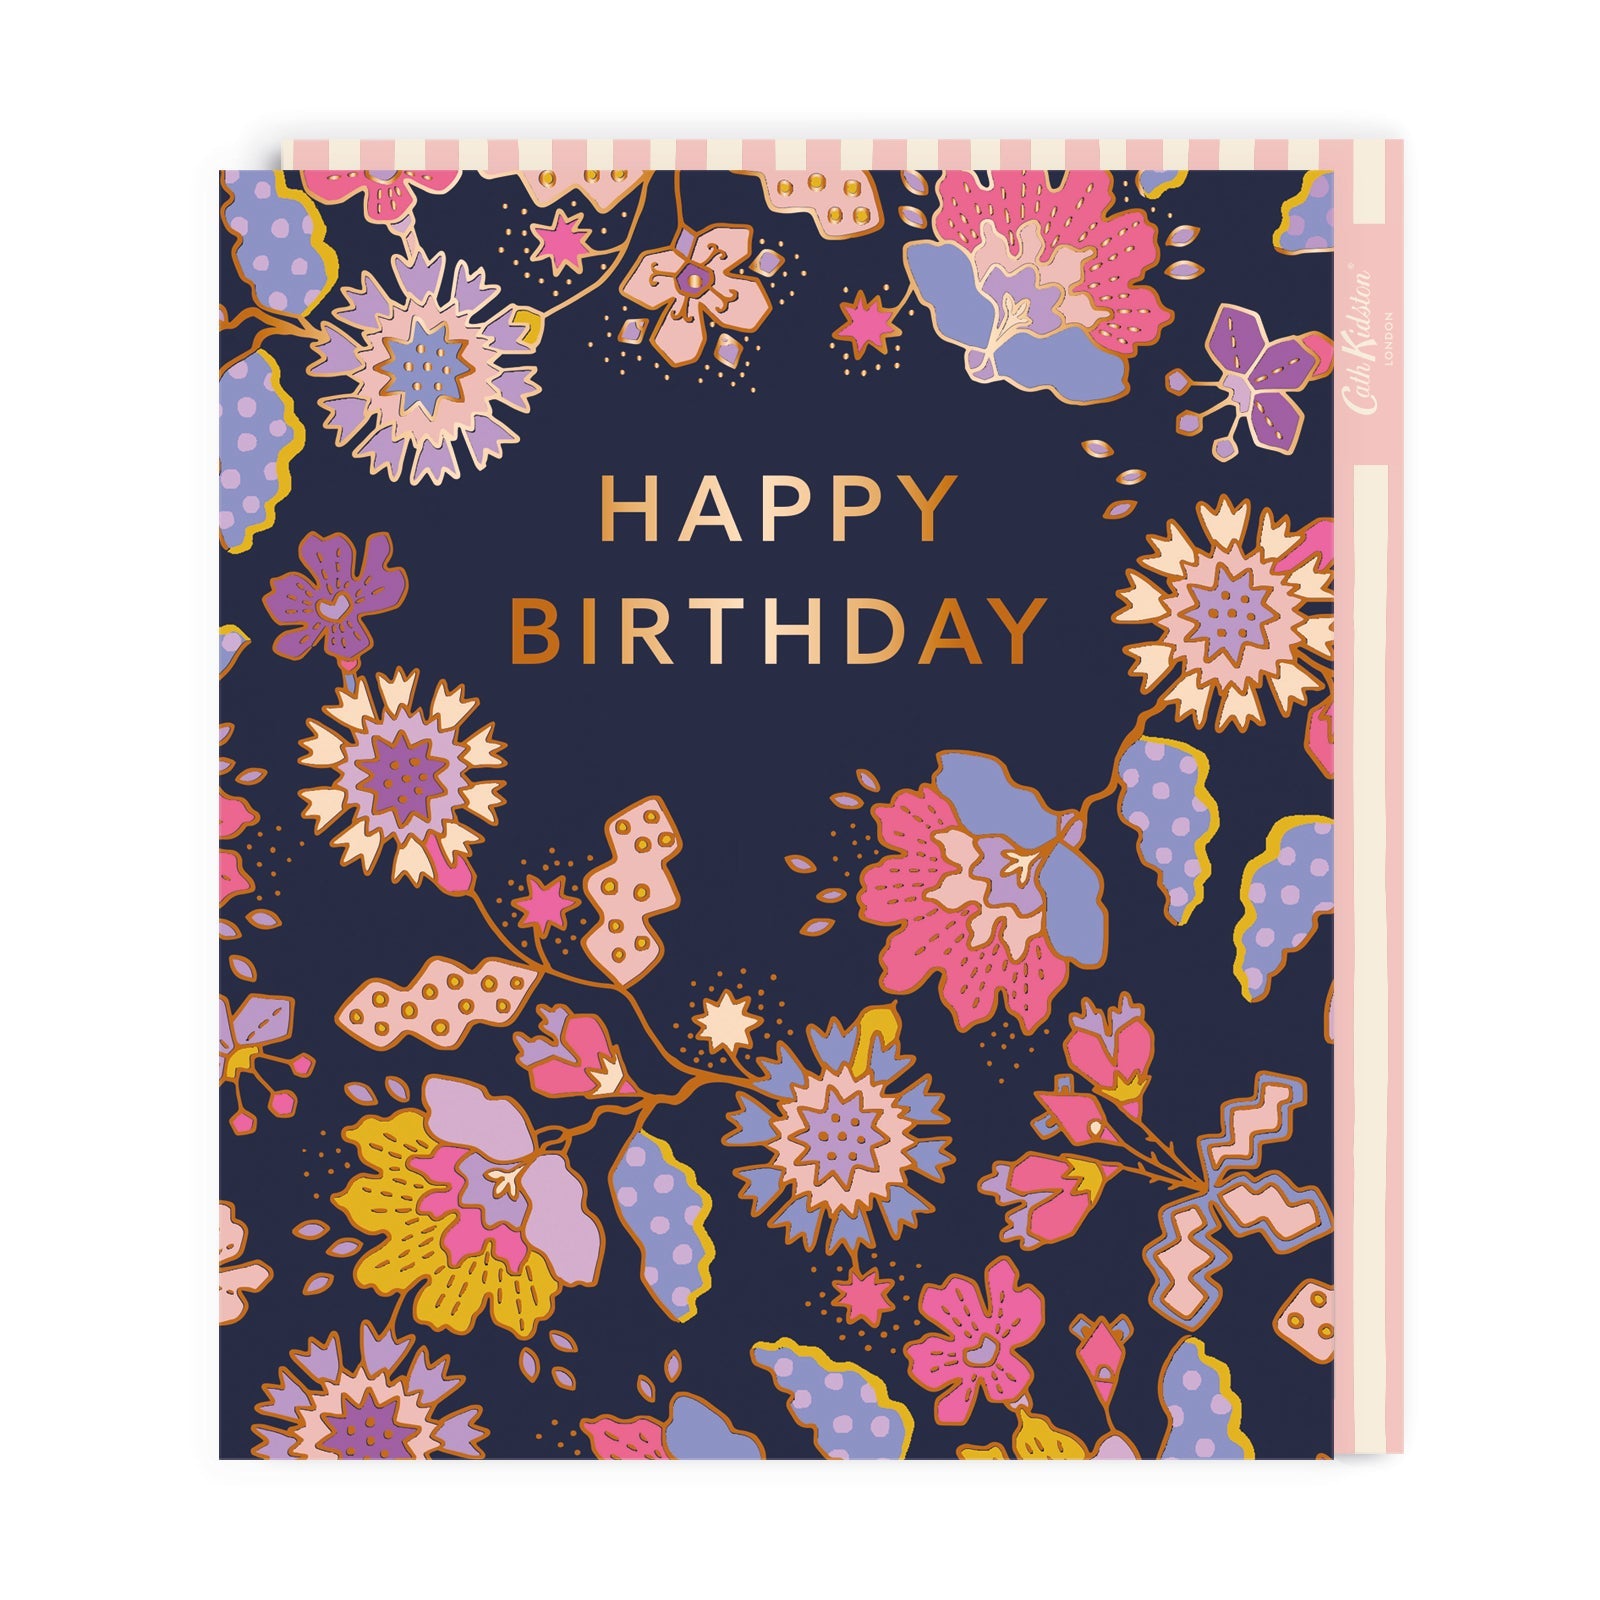 Classy floral design birthday card with gold foil lettering that reads Happy Birthday